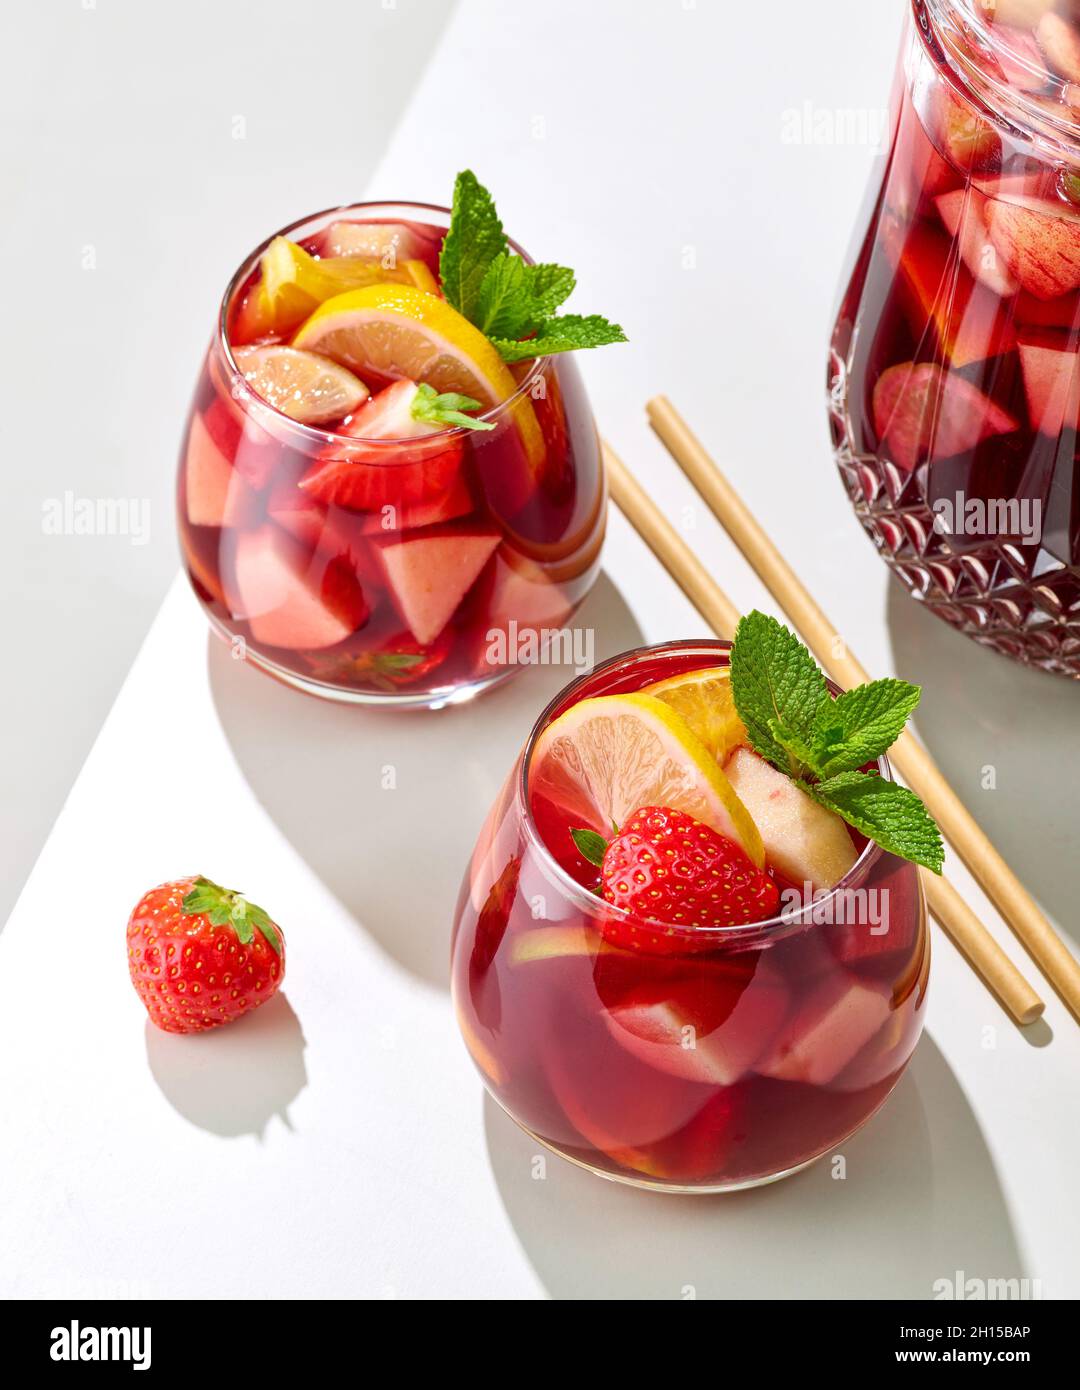 https://c8.alamy.com/comp/2H15BAP/jug-and-glasses-of-red-sangria-on-white-restaurant-table-2H15BAP.jpg